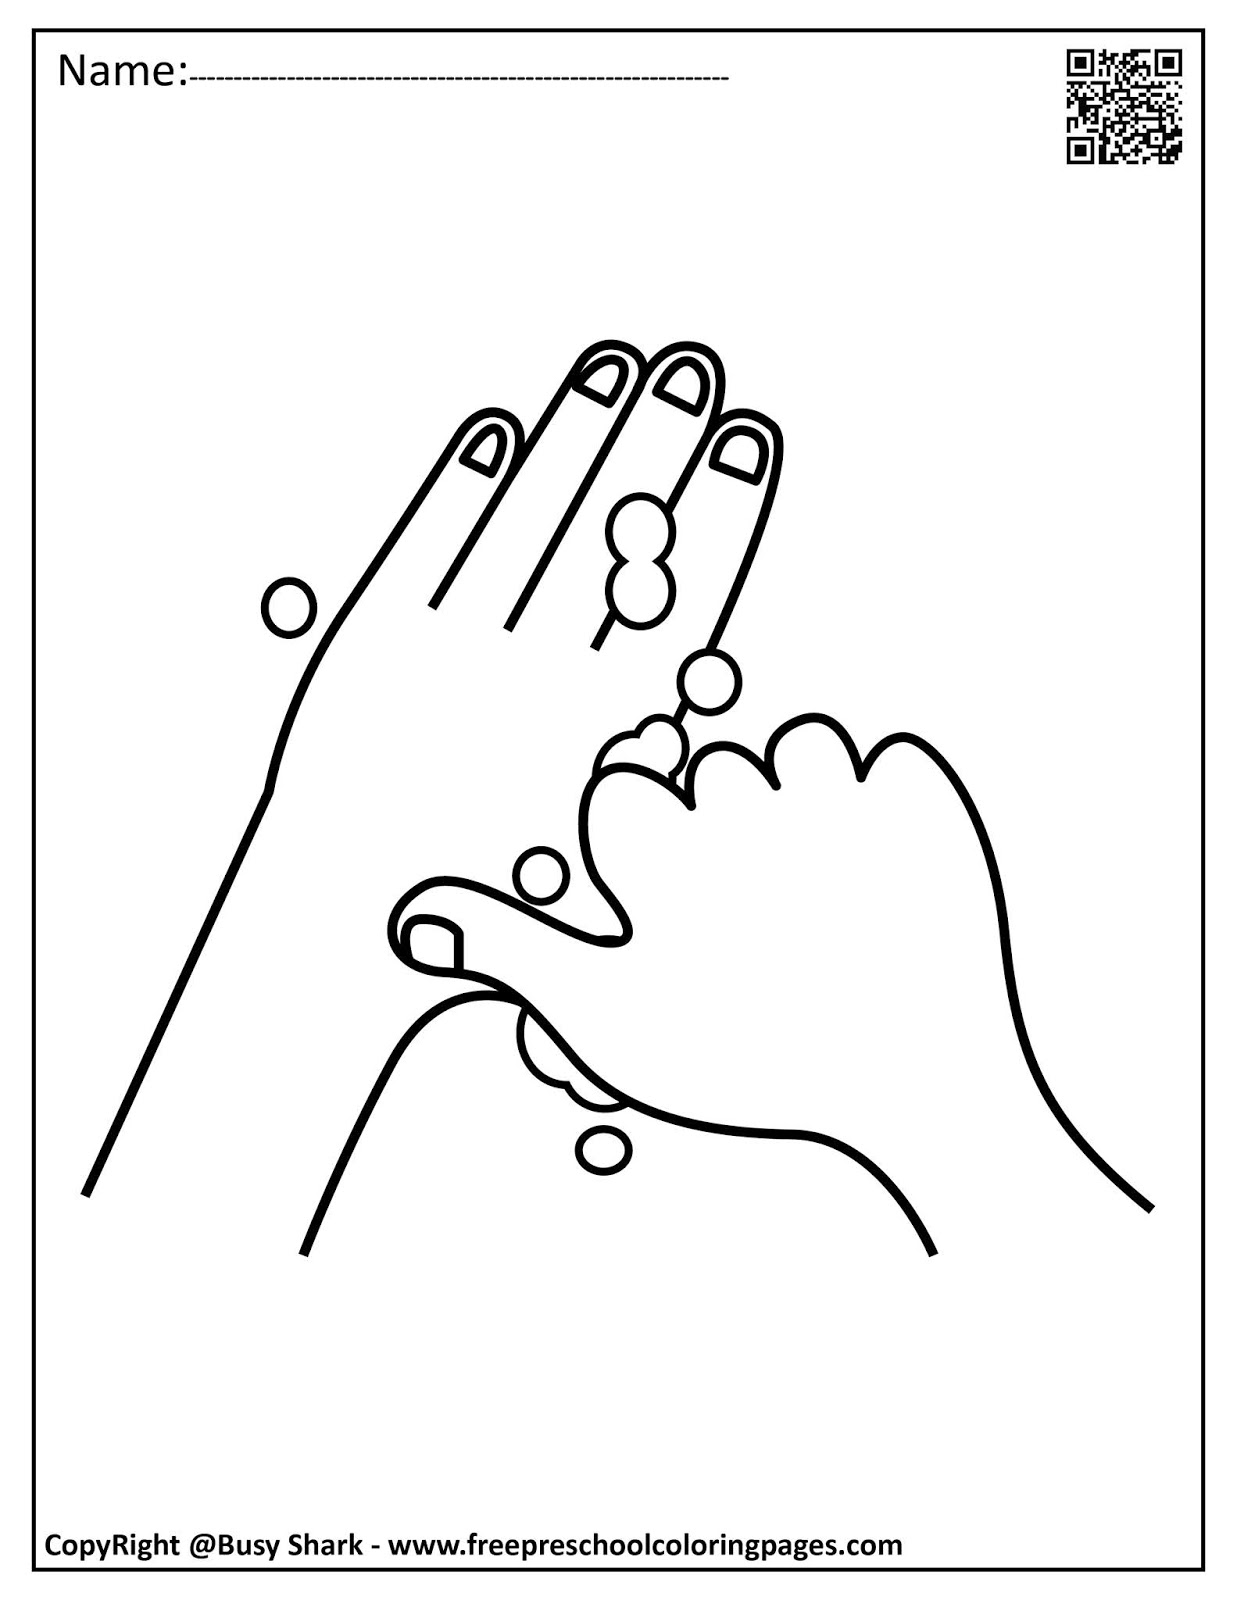 Cdc Hand Washing Coloring Page Coloring Pages